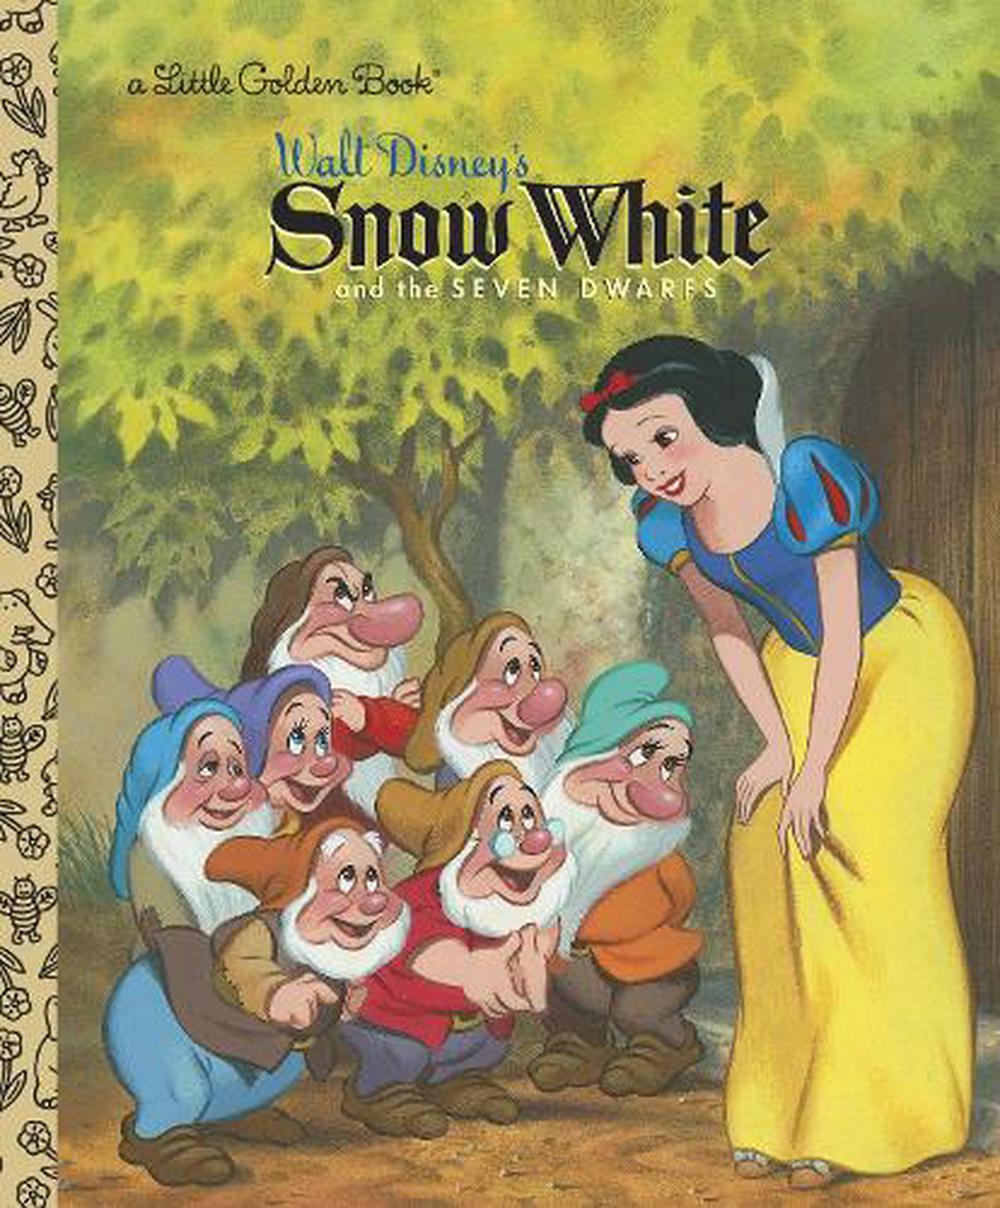 Little Golden Book: Snow White and the Seven Dwarfs (Disney Classic) (Hardcover) - image 1 of 1